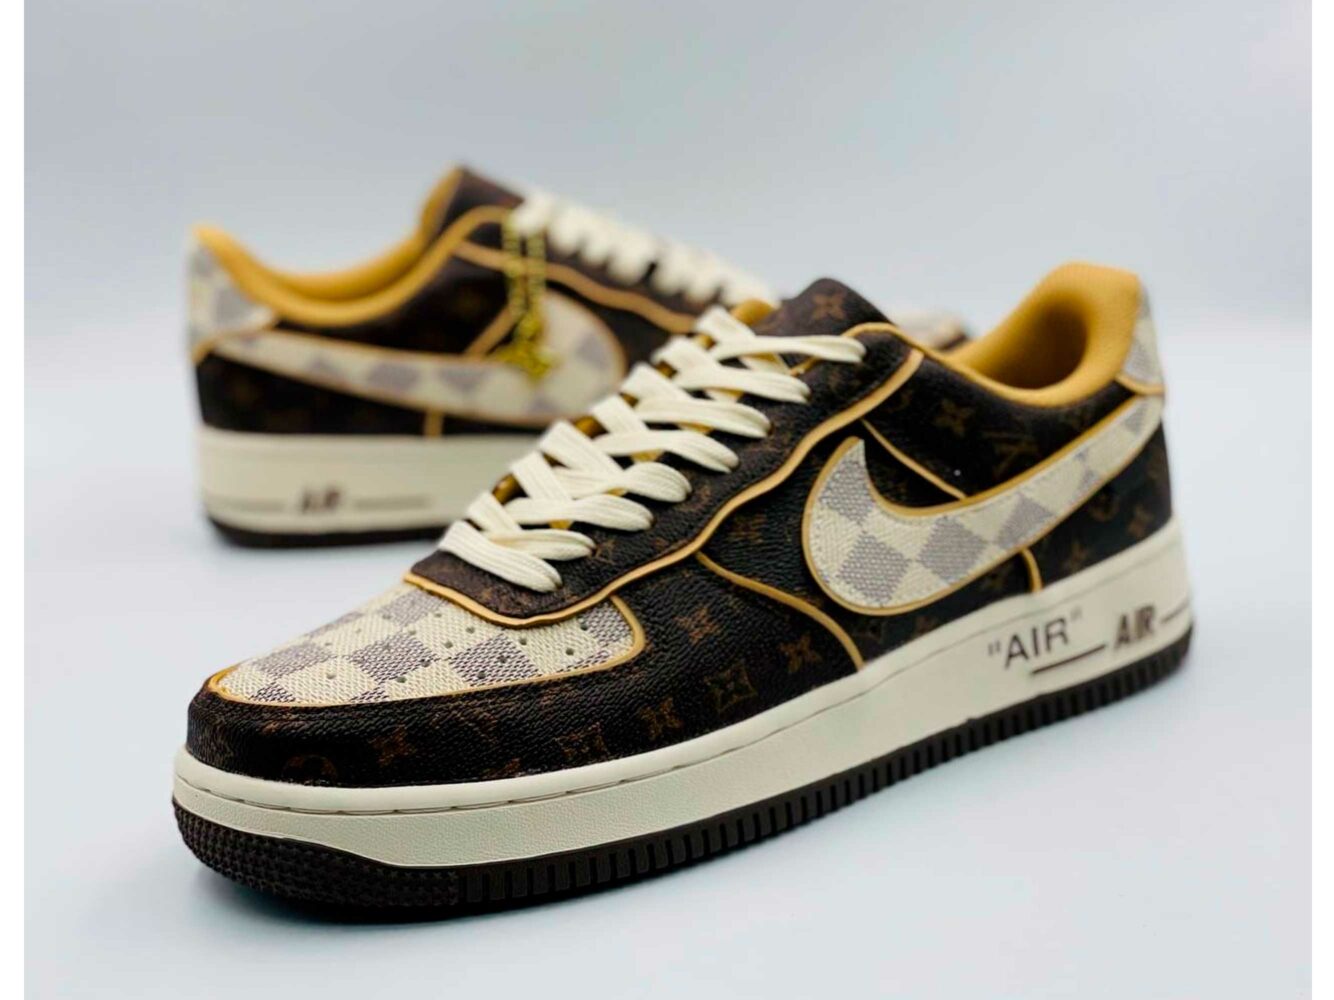 nike air force 1 sotheby s auction results x louis vuitton brown купить